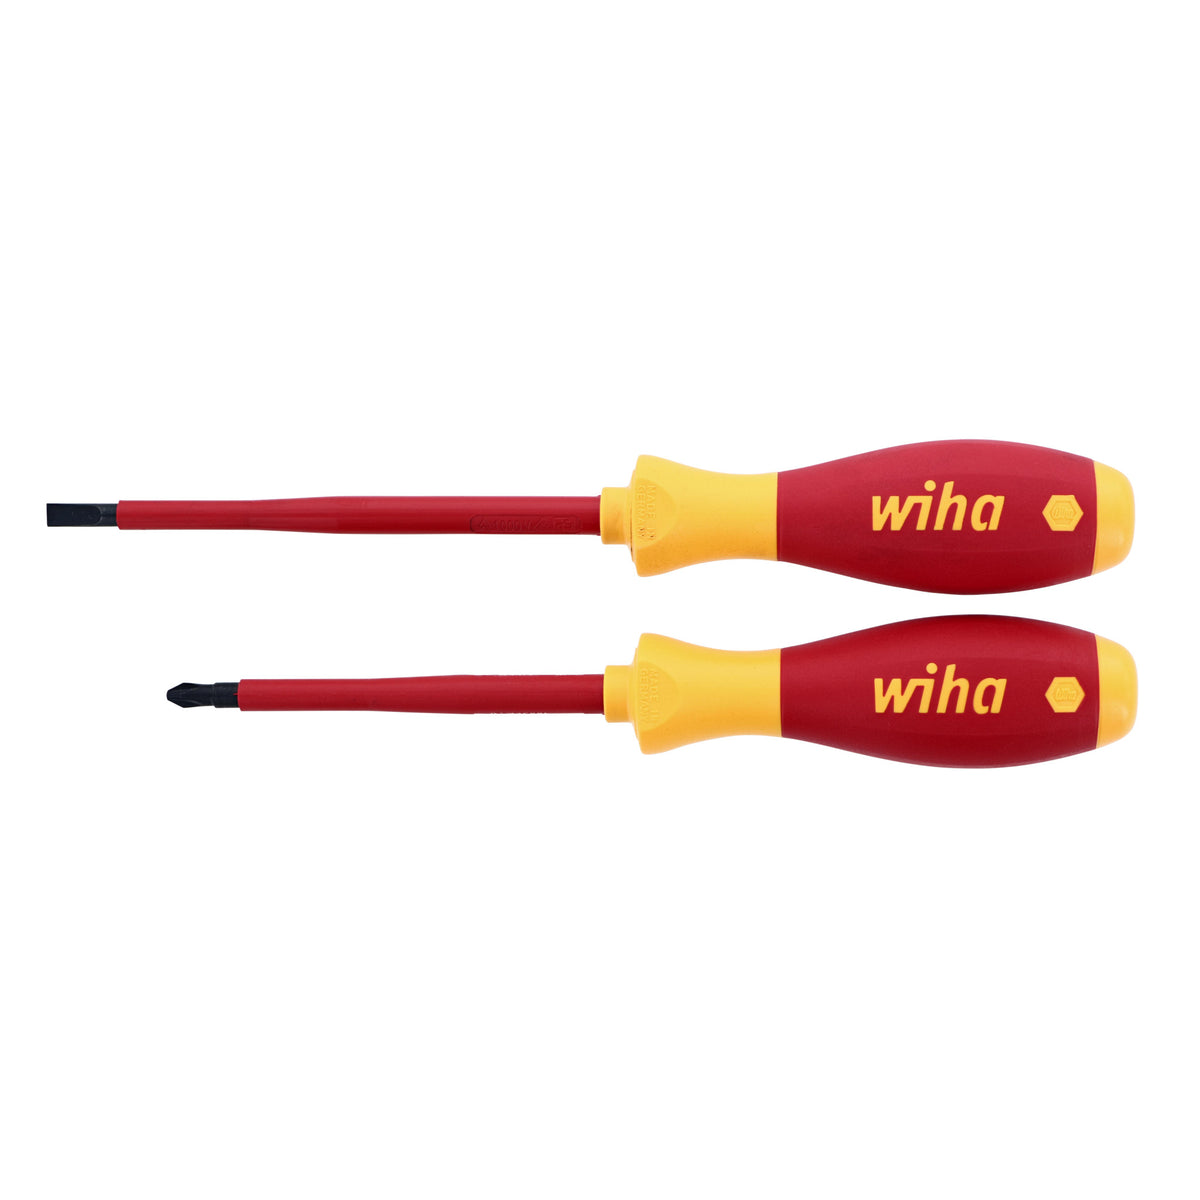 Wiha 32105 Insulated Slotted & Phillips 2 Pc. Set Made in Germany